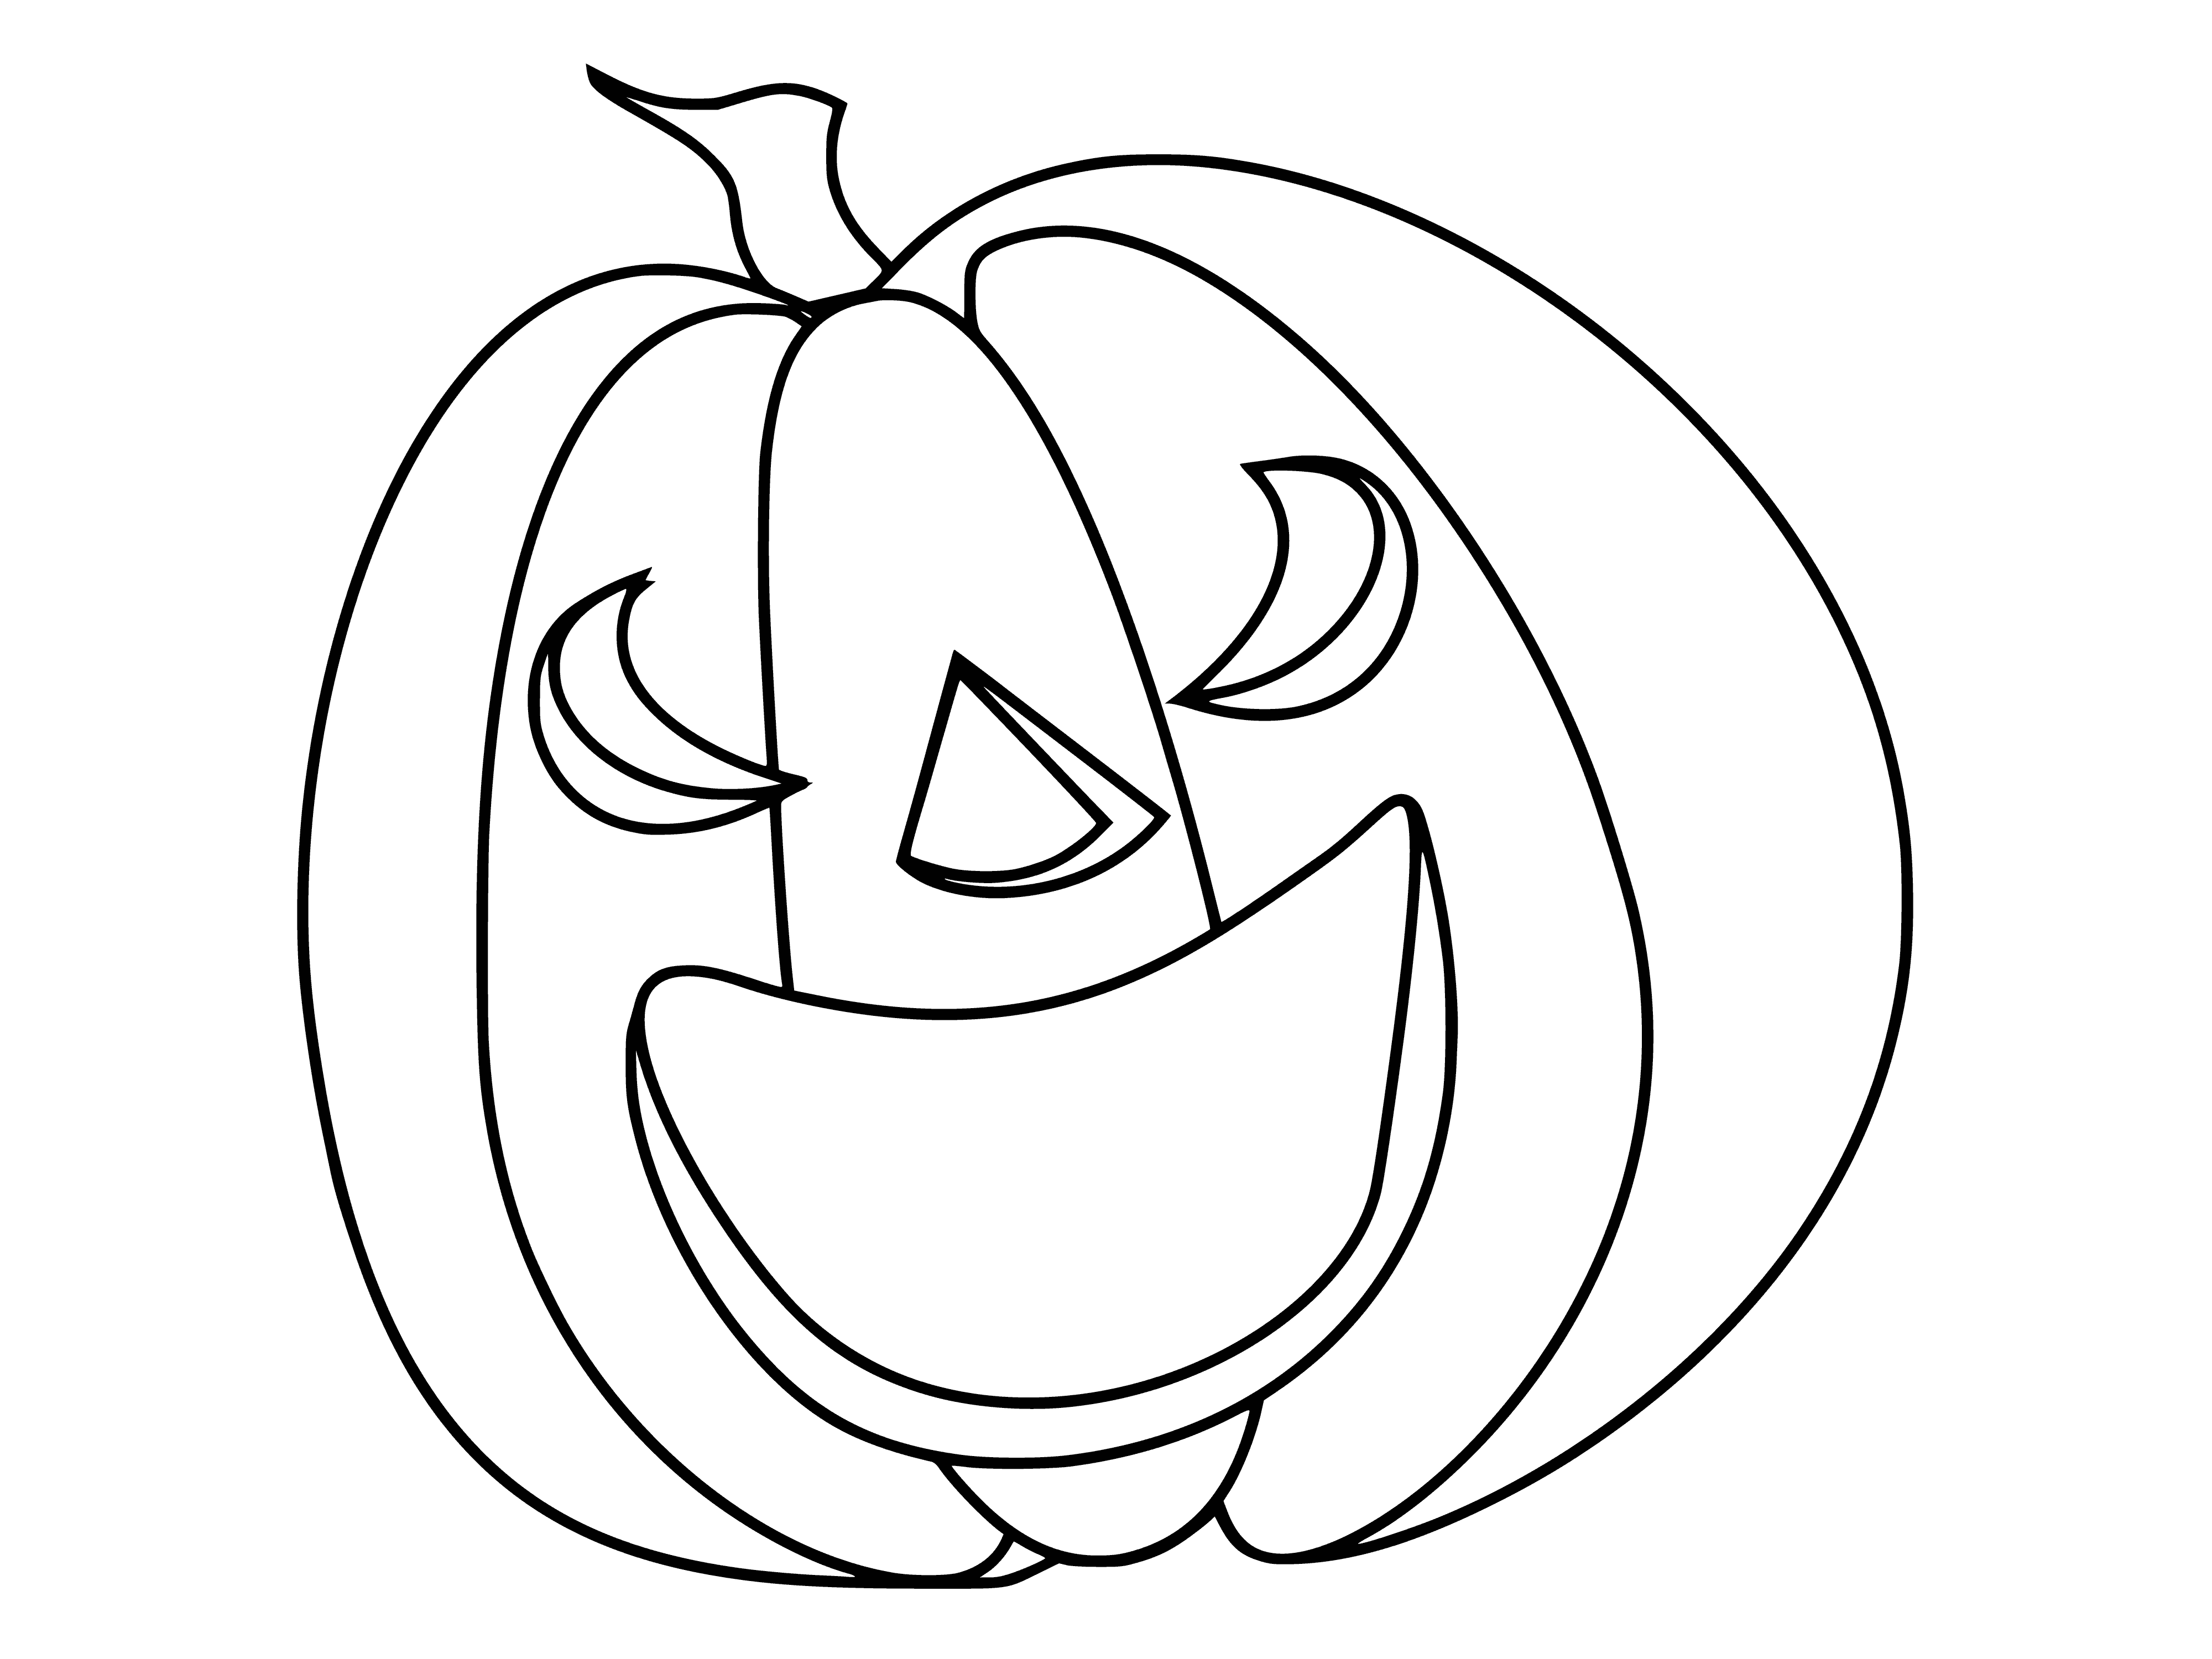 coloring page: A large pumpkin is carved into a terrifying face with two triangular eyes, a crooked nose, and sharp teeth. Two smaller pumpkins sit on either side. #harvestseason